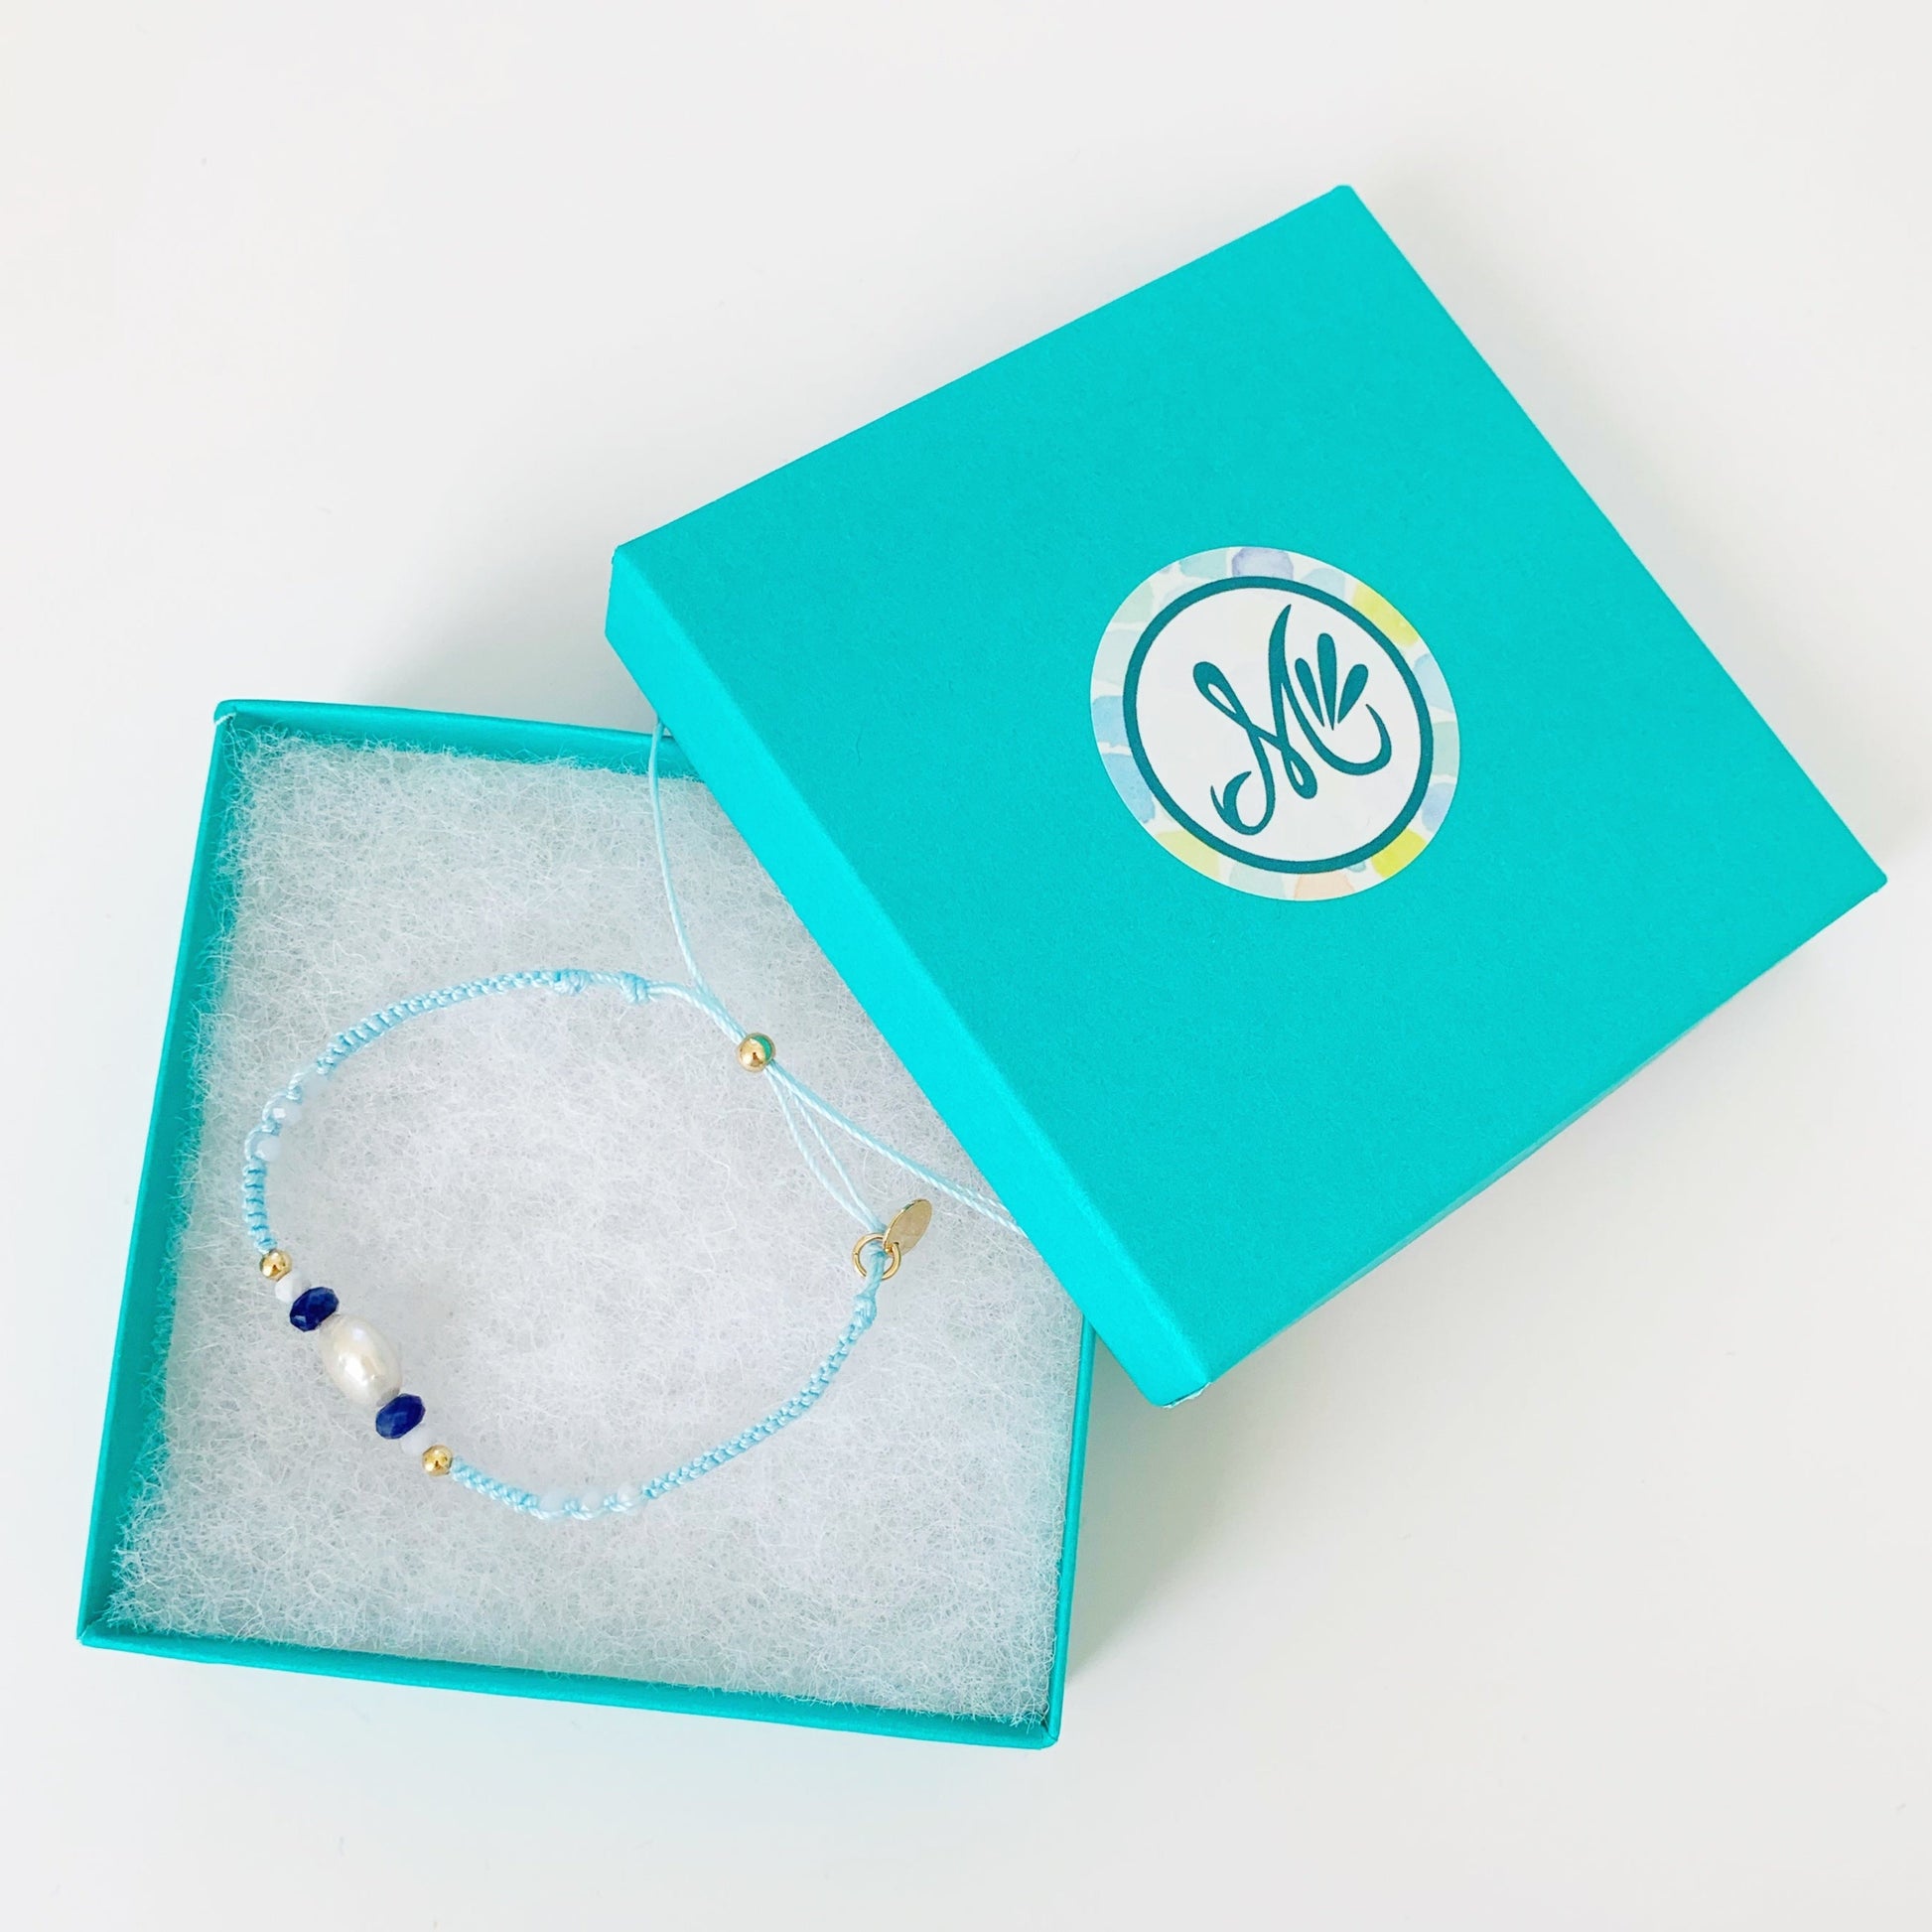 forget me knot light blue macrame bracelet photographed in a teal mermaids and madeleines box on a white surface